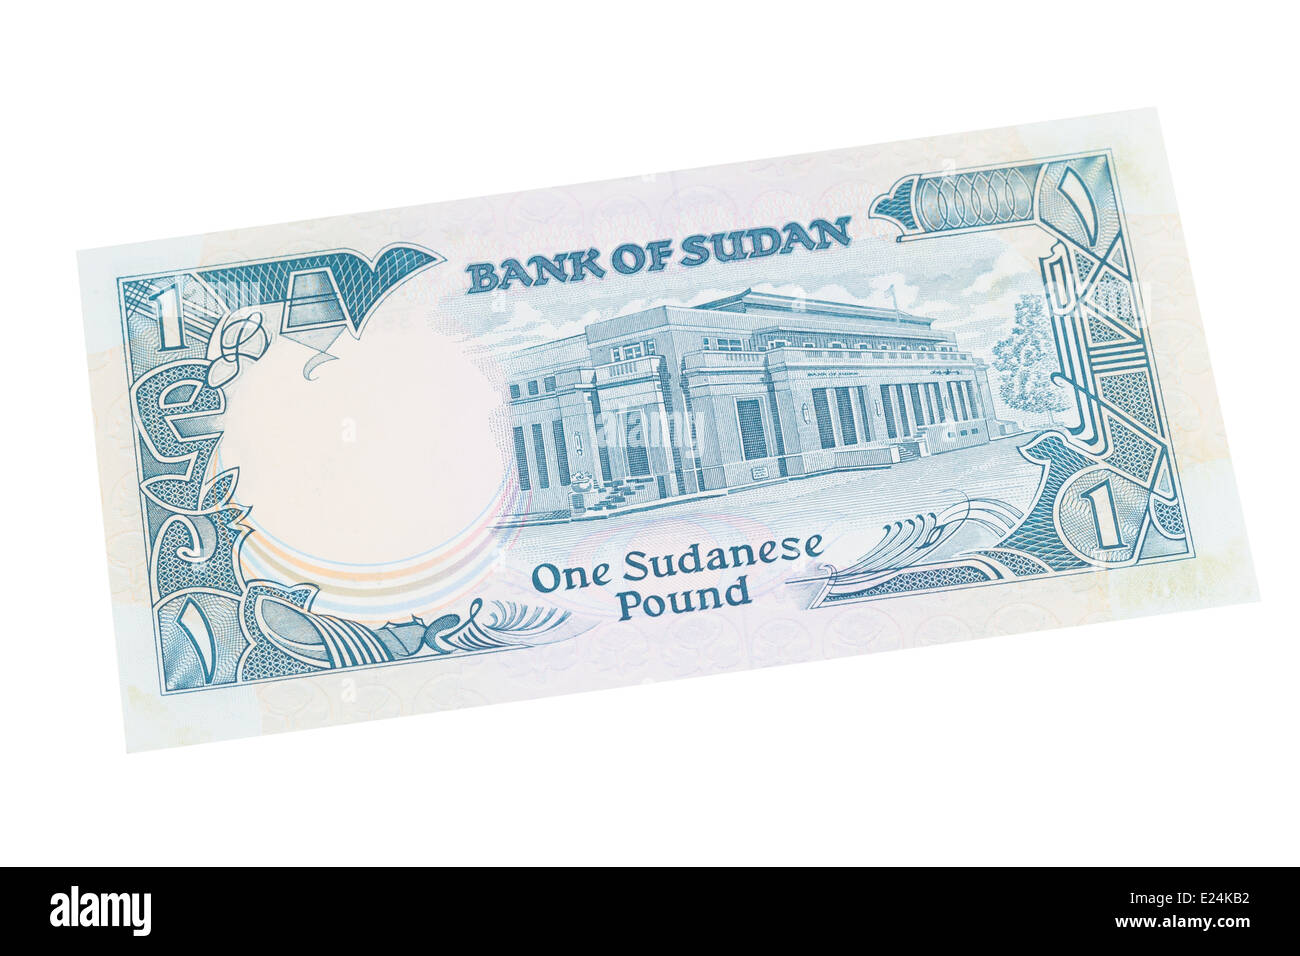 Sudanese one pound banknote on a white background Stock Photo